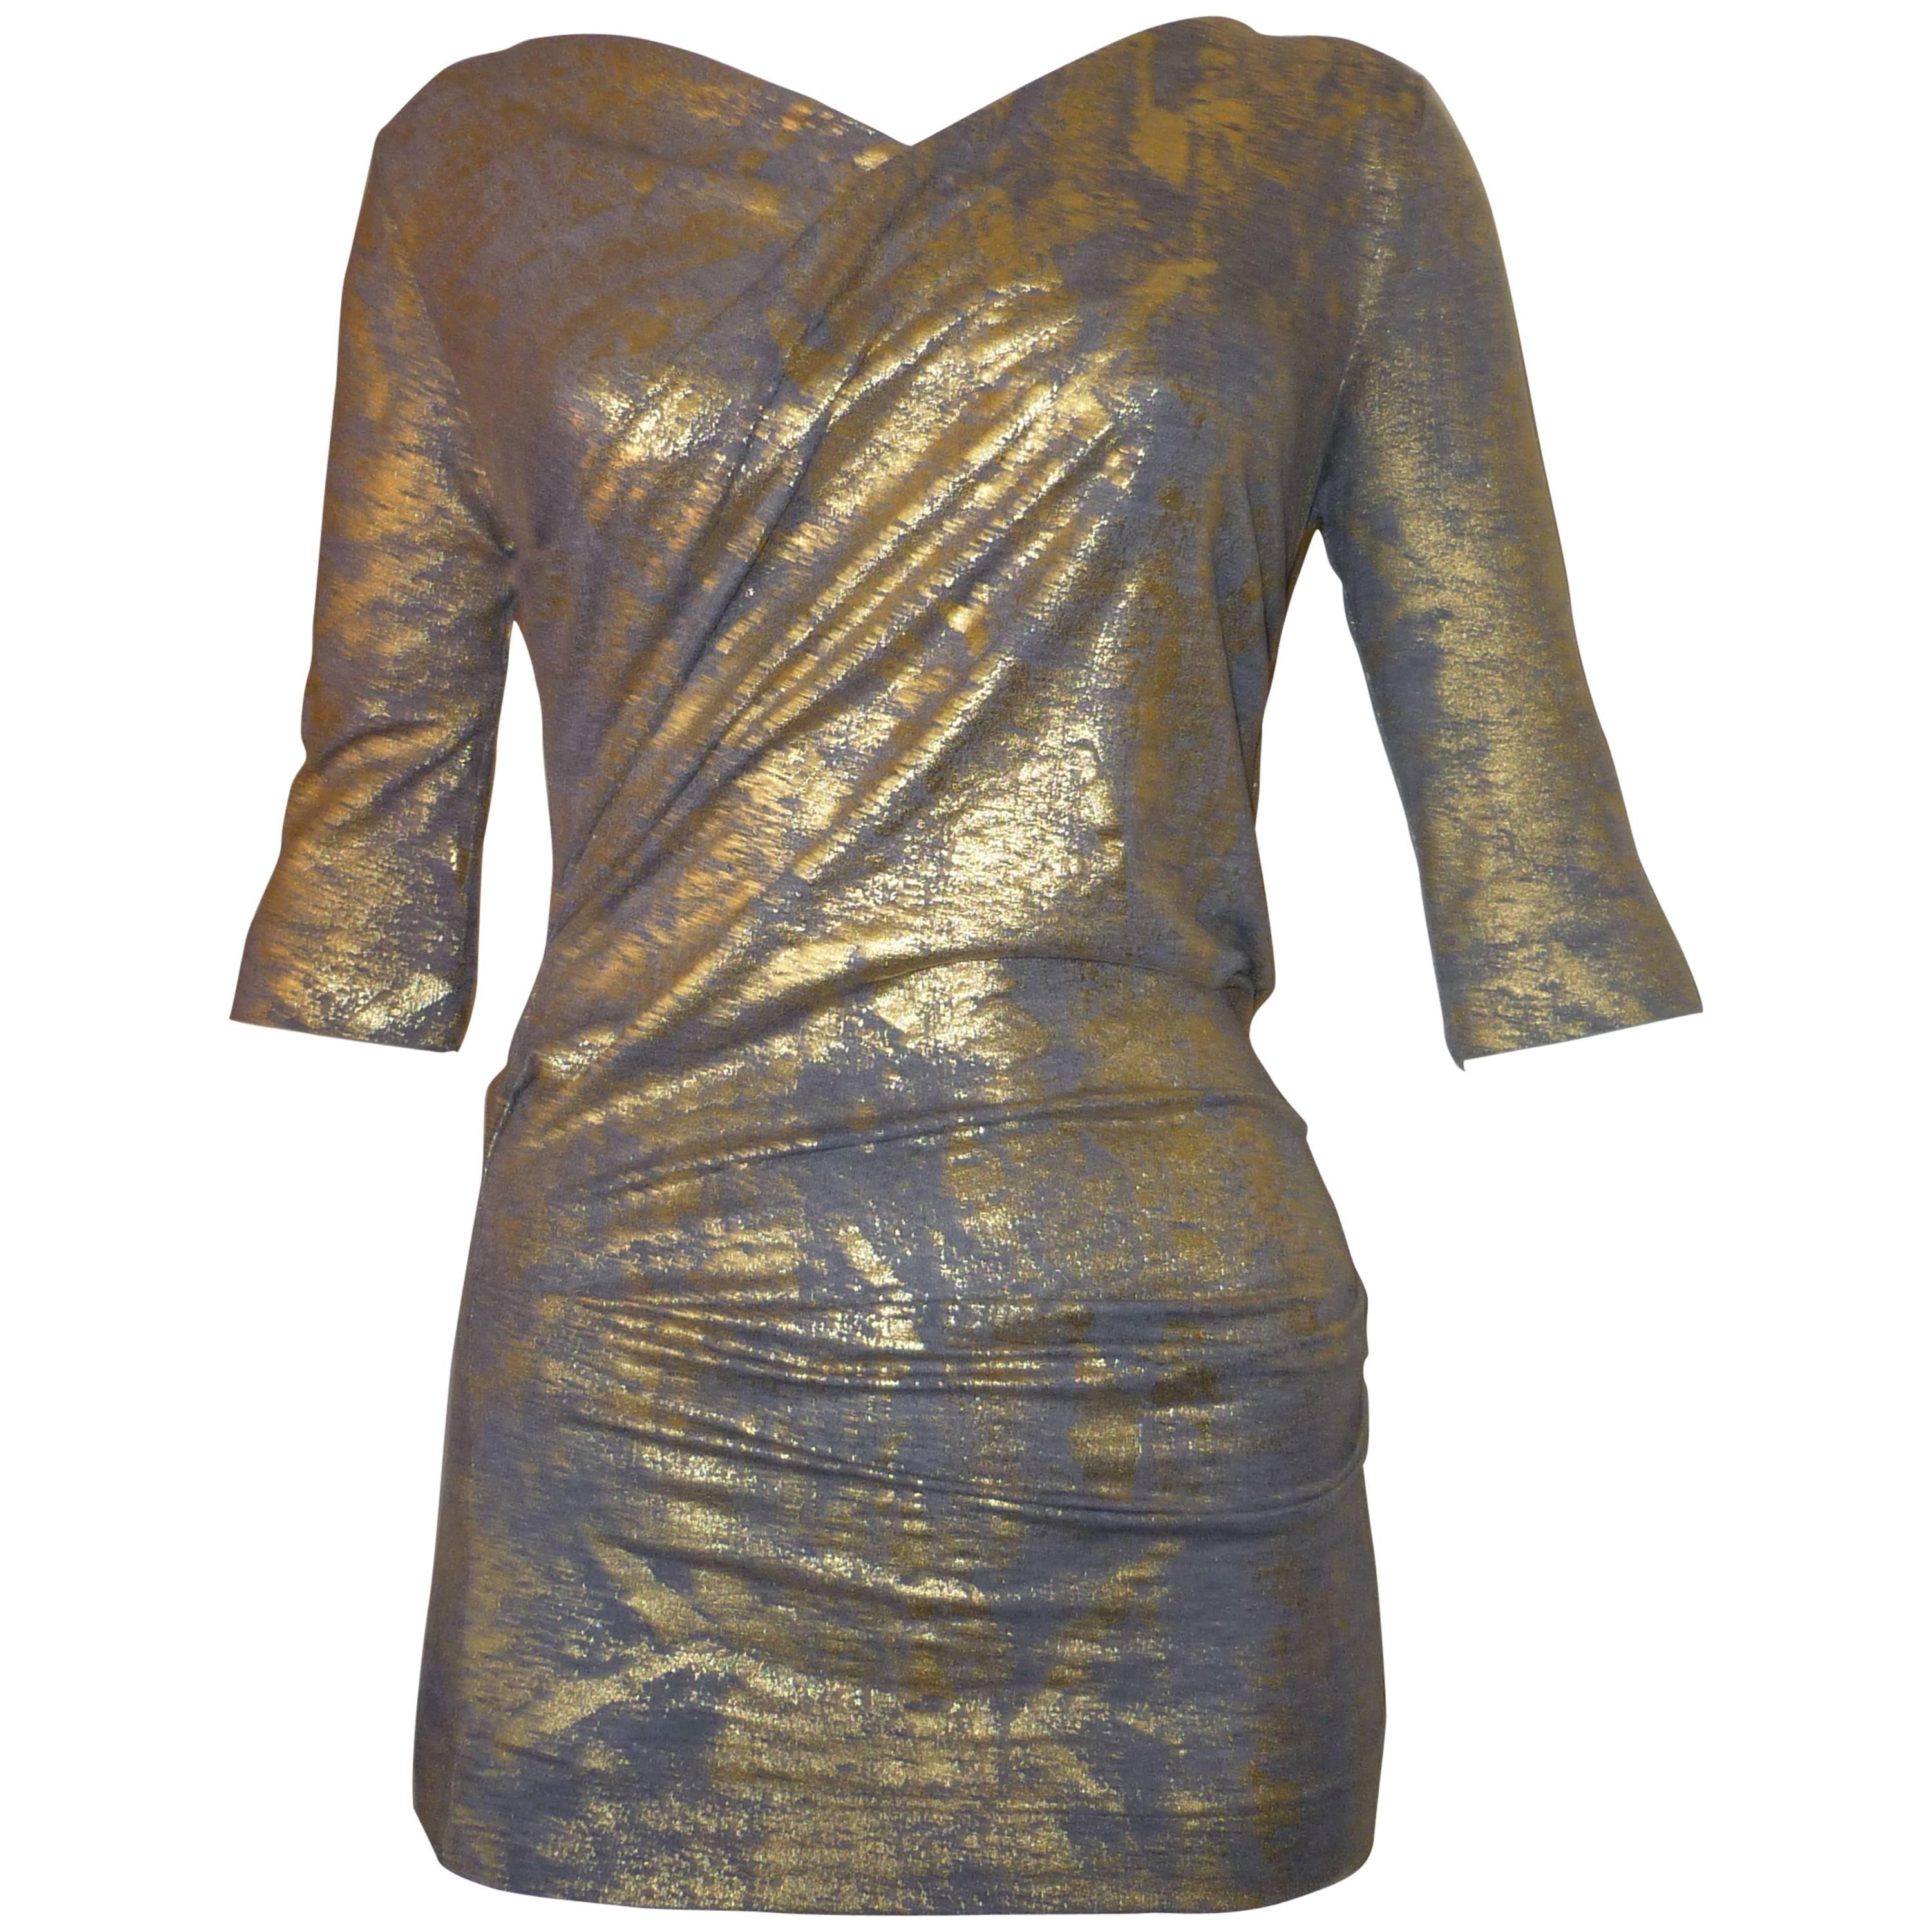 Vivienne Westwood Silver and Gold Laeticia Top (xs)